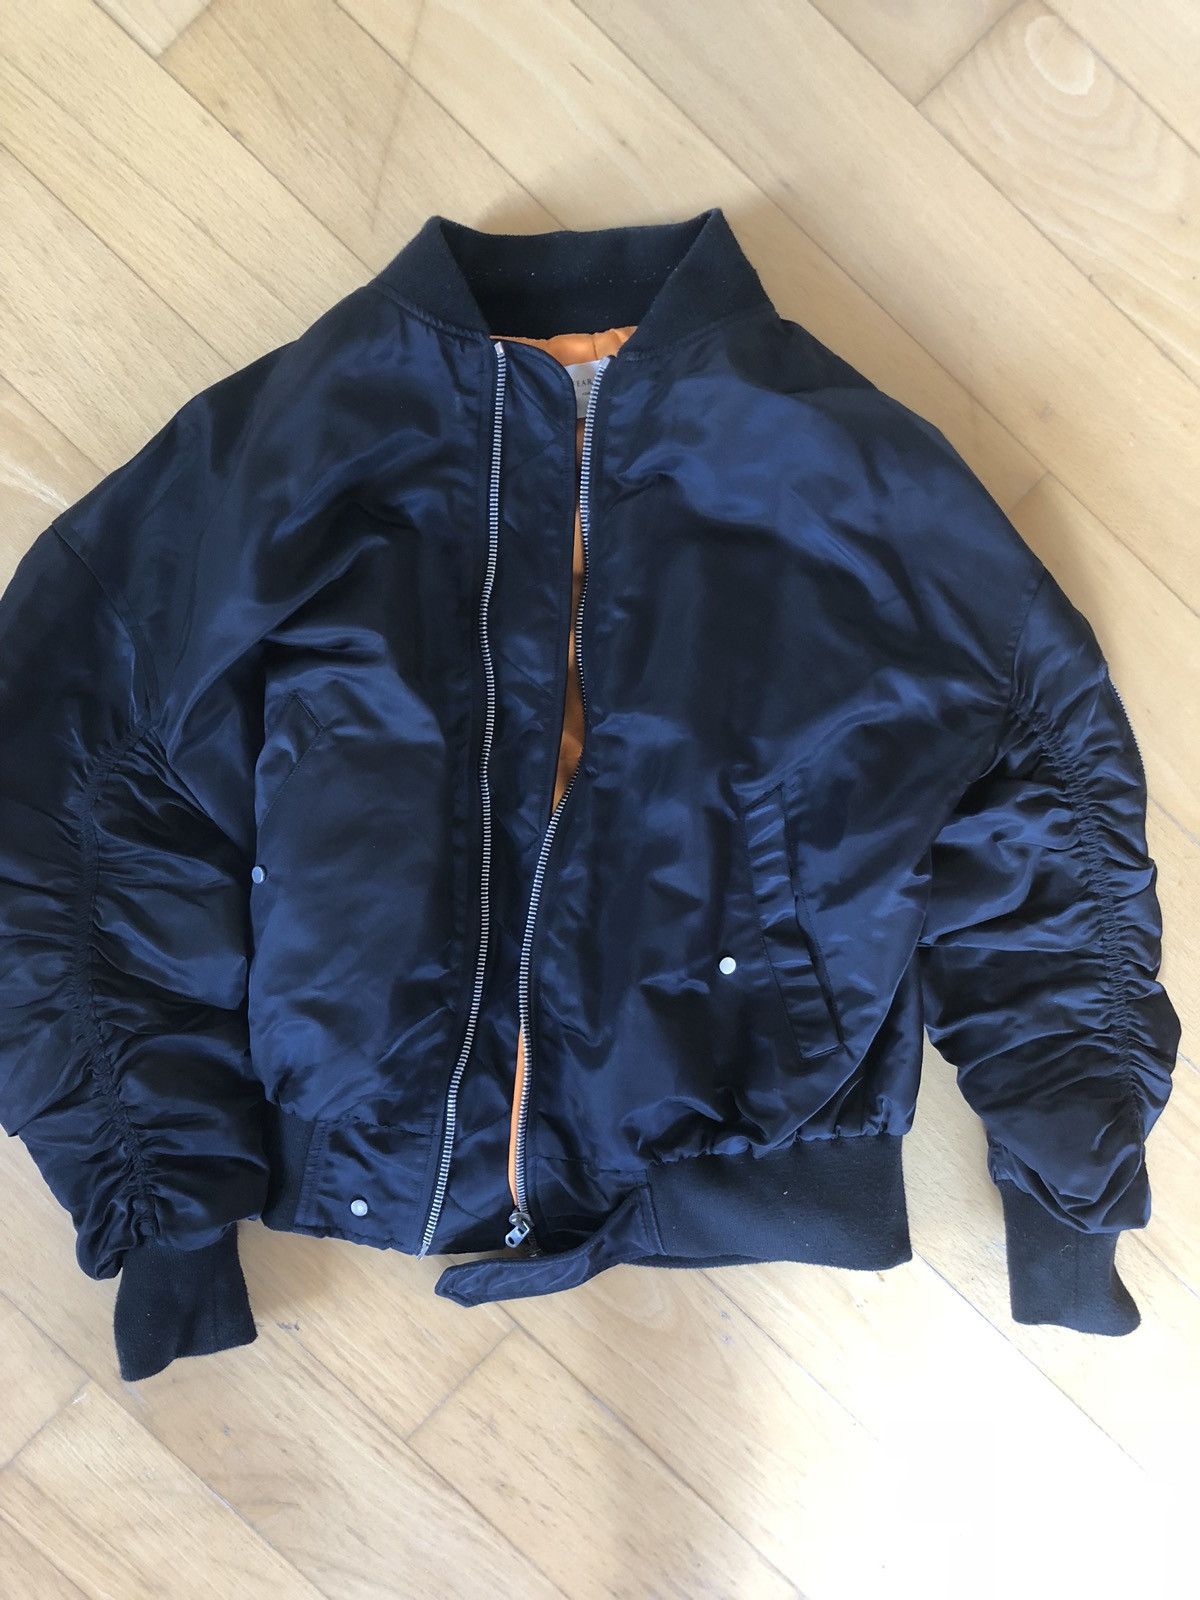 Fear of God 4th collection bomber jacket black | Grailed